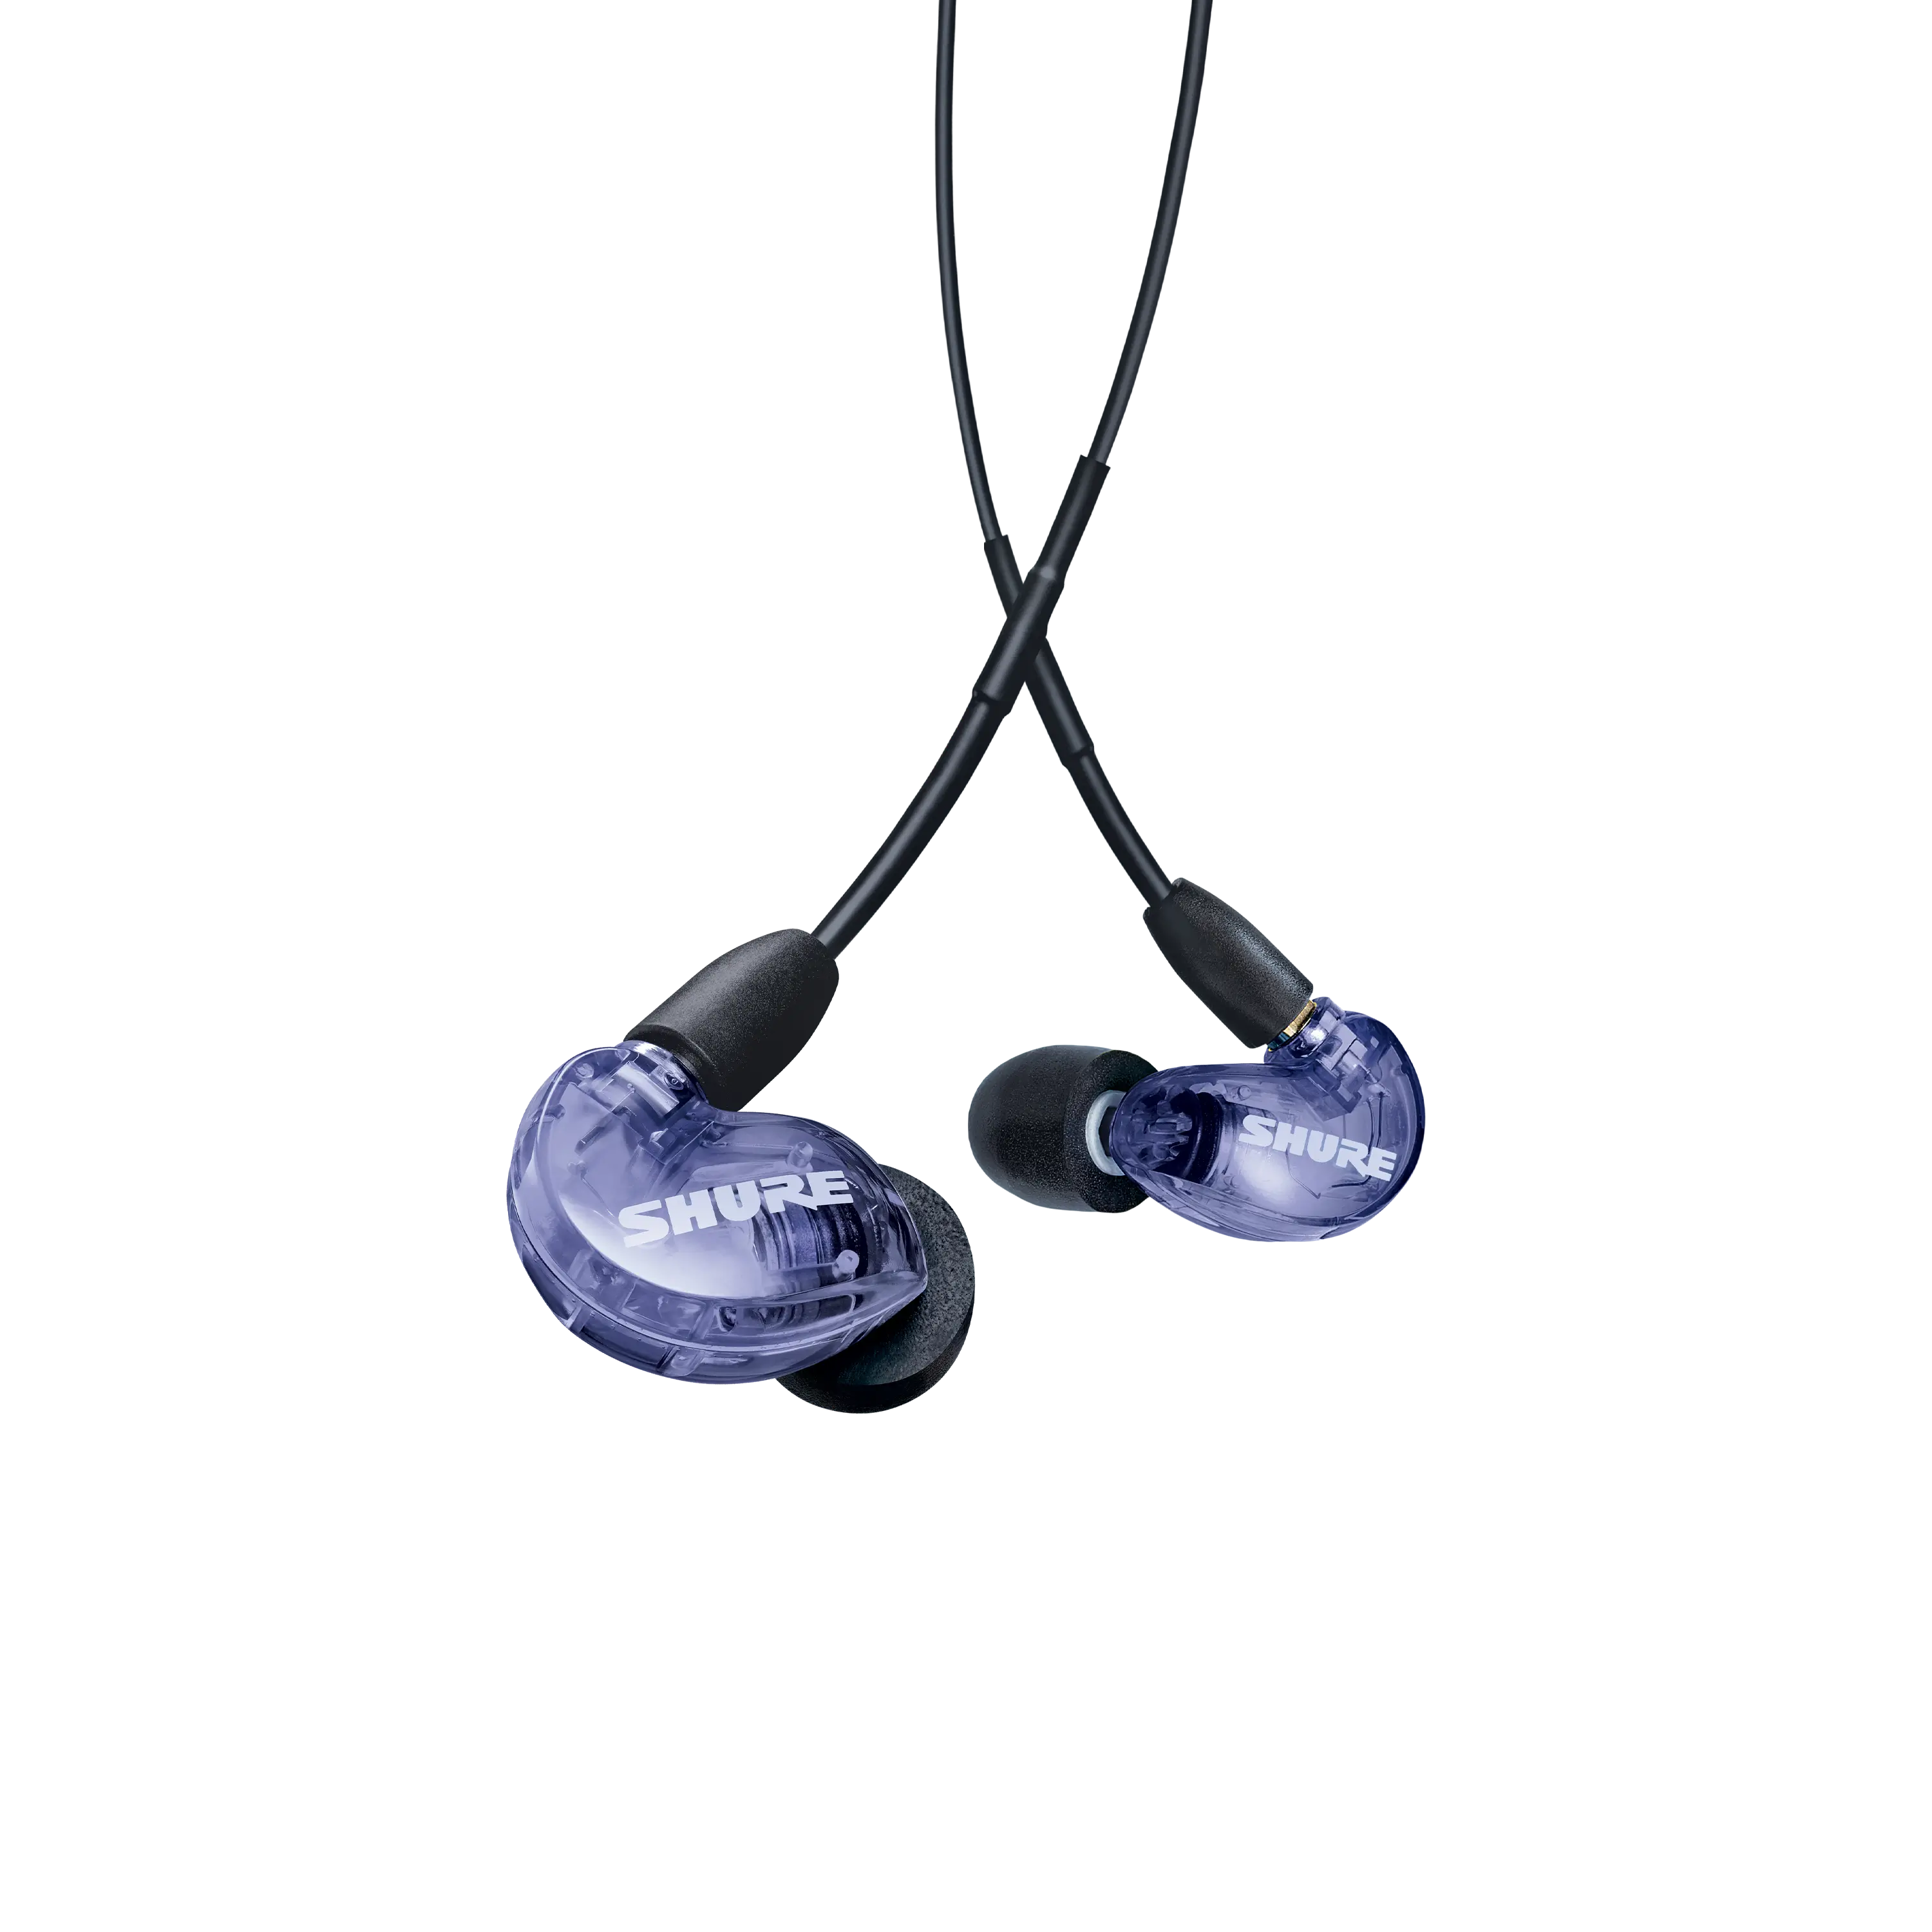 Shure SE215 PRO Wired Earbuds - Professional Sound Isolating Earphones,  Clear Sound & Deep Bass, Single Dynamic MicroDriver, Secure Fit in Ear